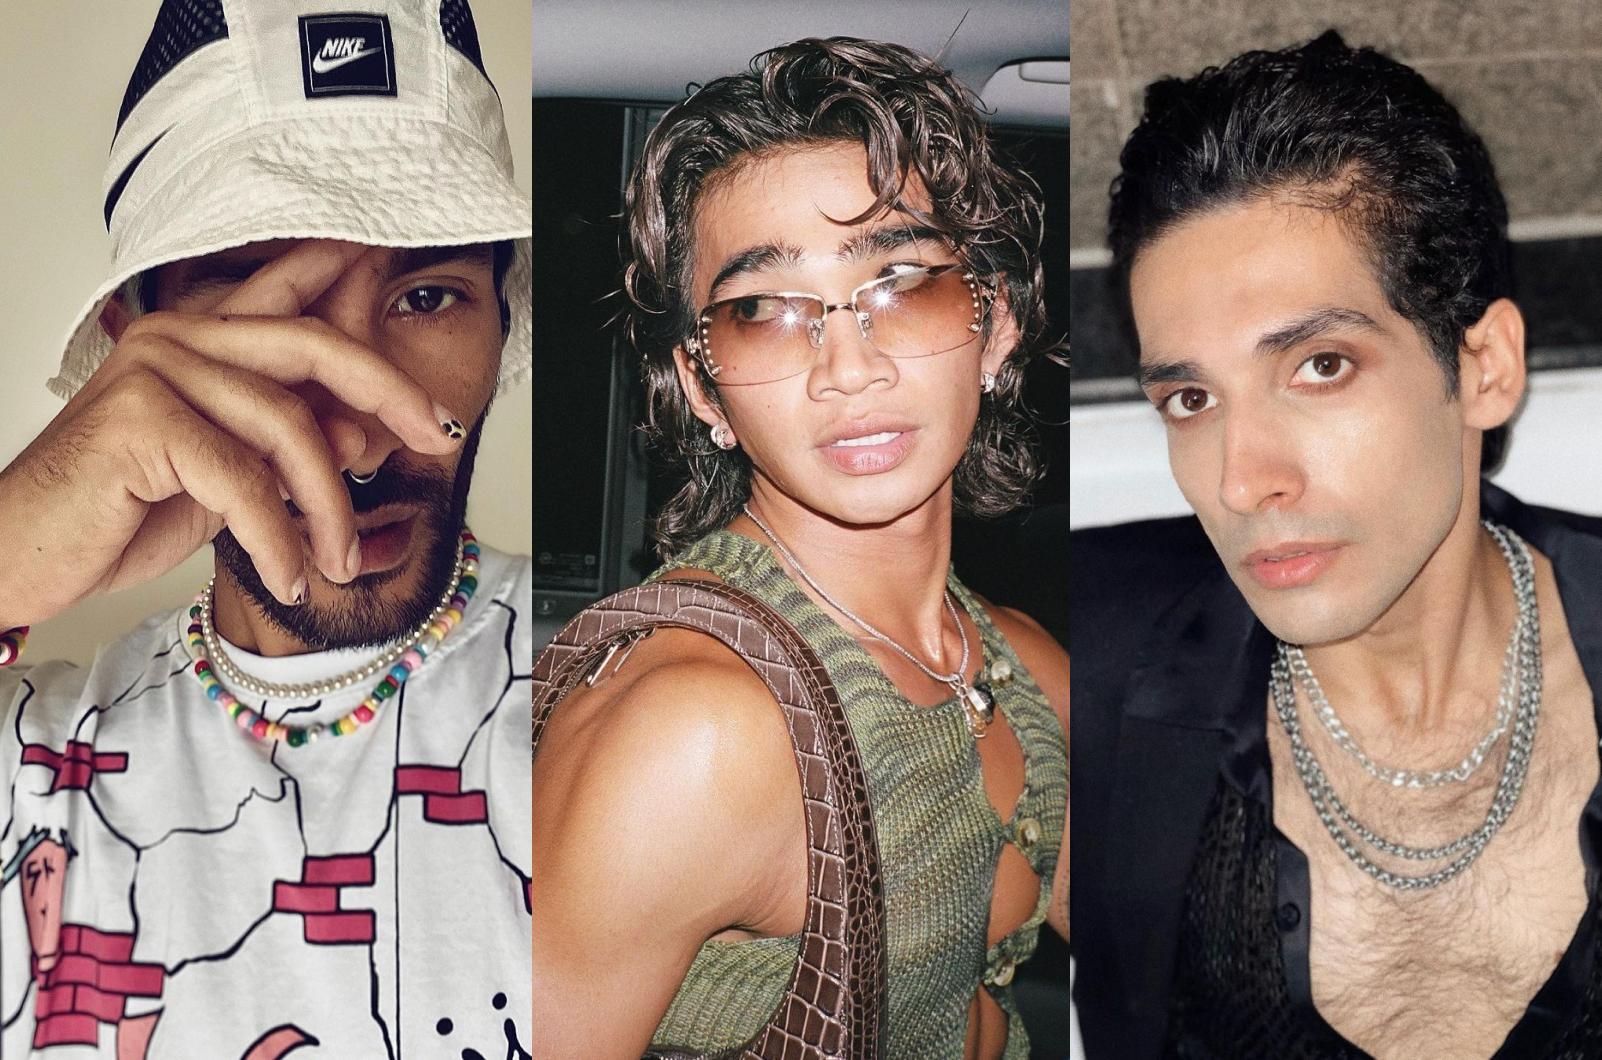 8 Men Whose Instagram Feeds Ooze With Fashion Inspiration We Could All Use